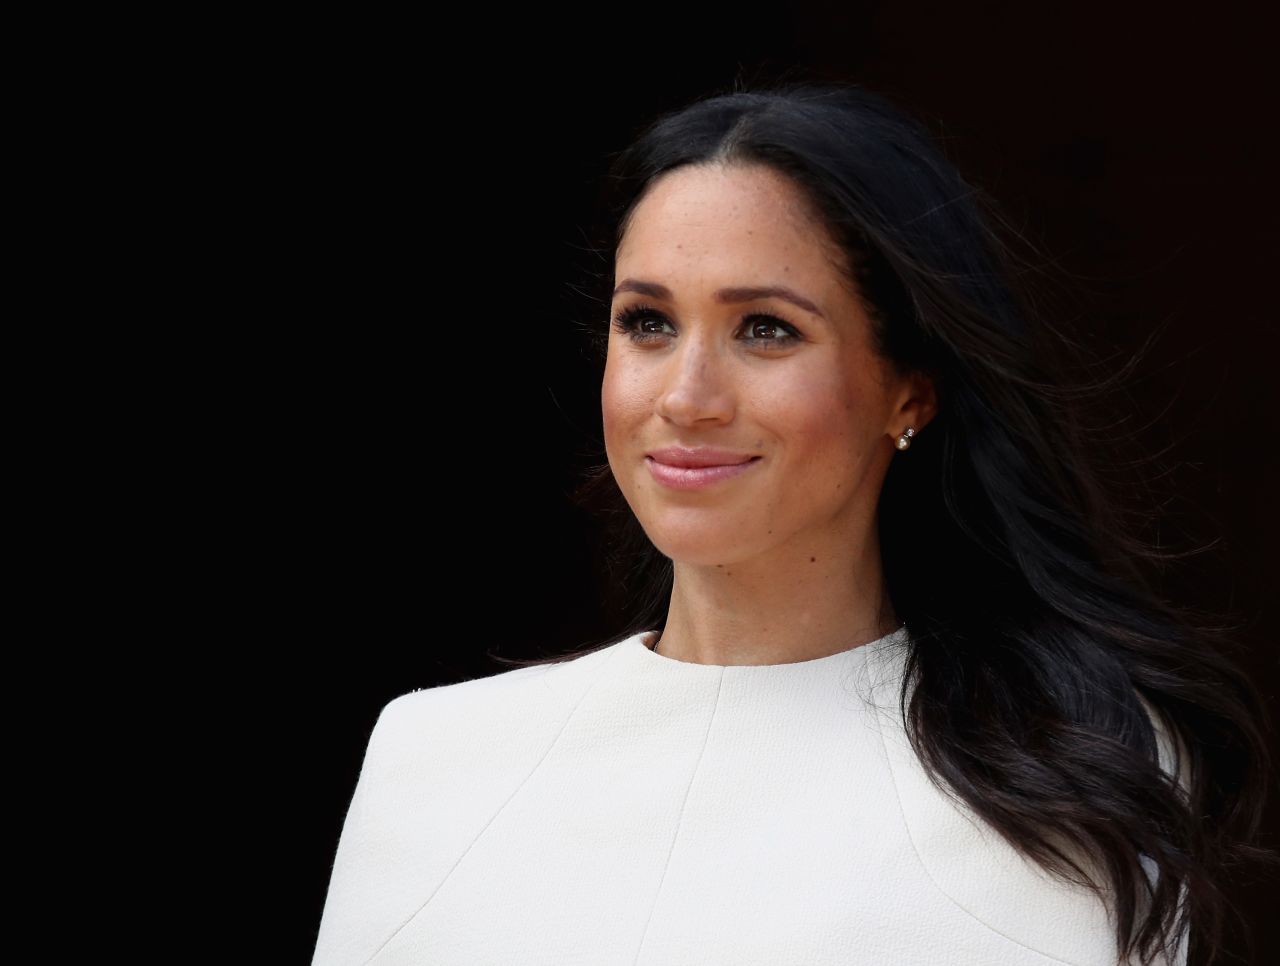 While Meghan has visited the region previously, the tour will be her first trip to South Africa.